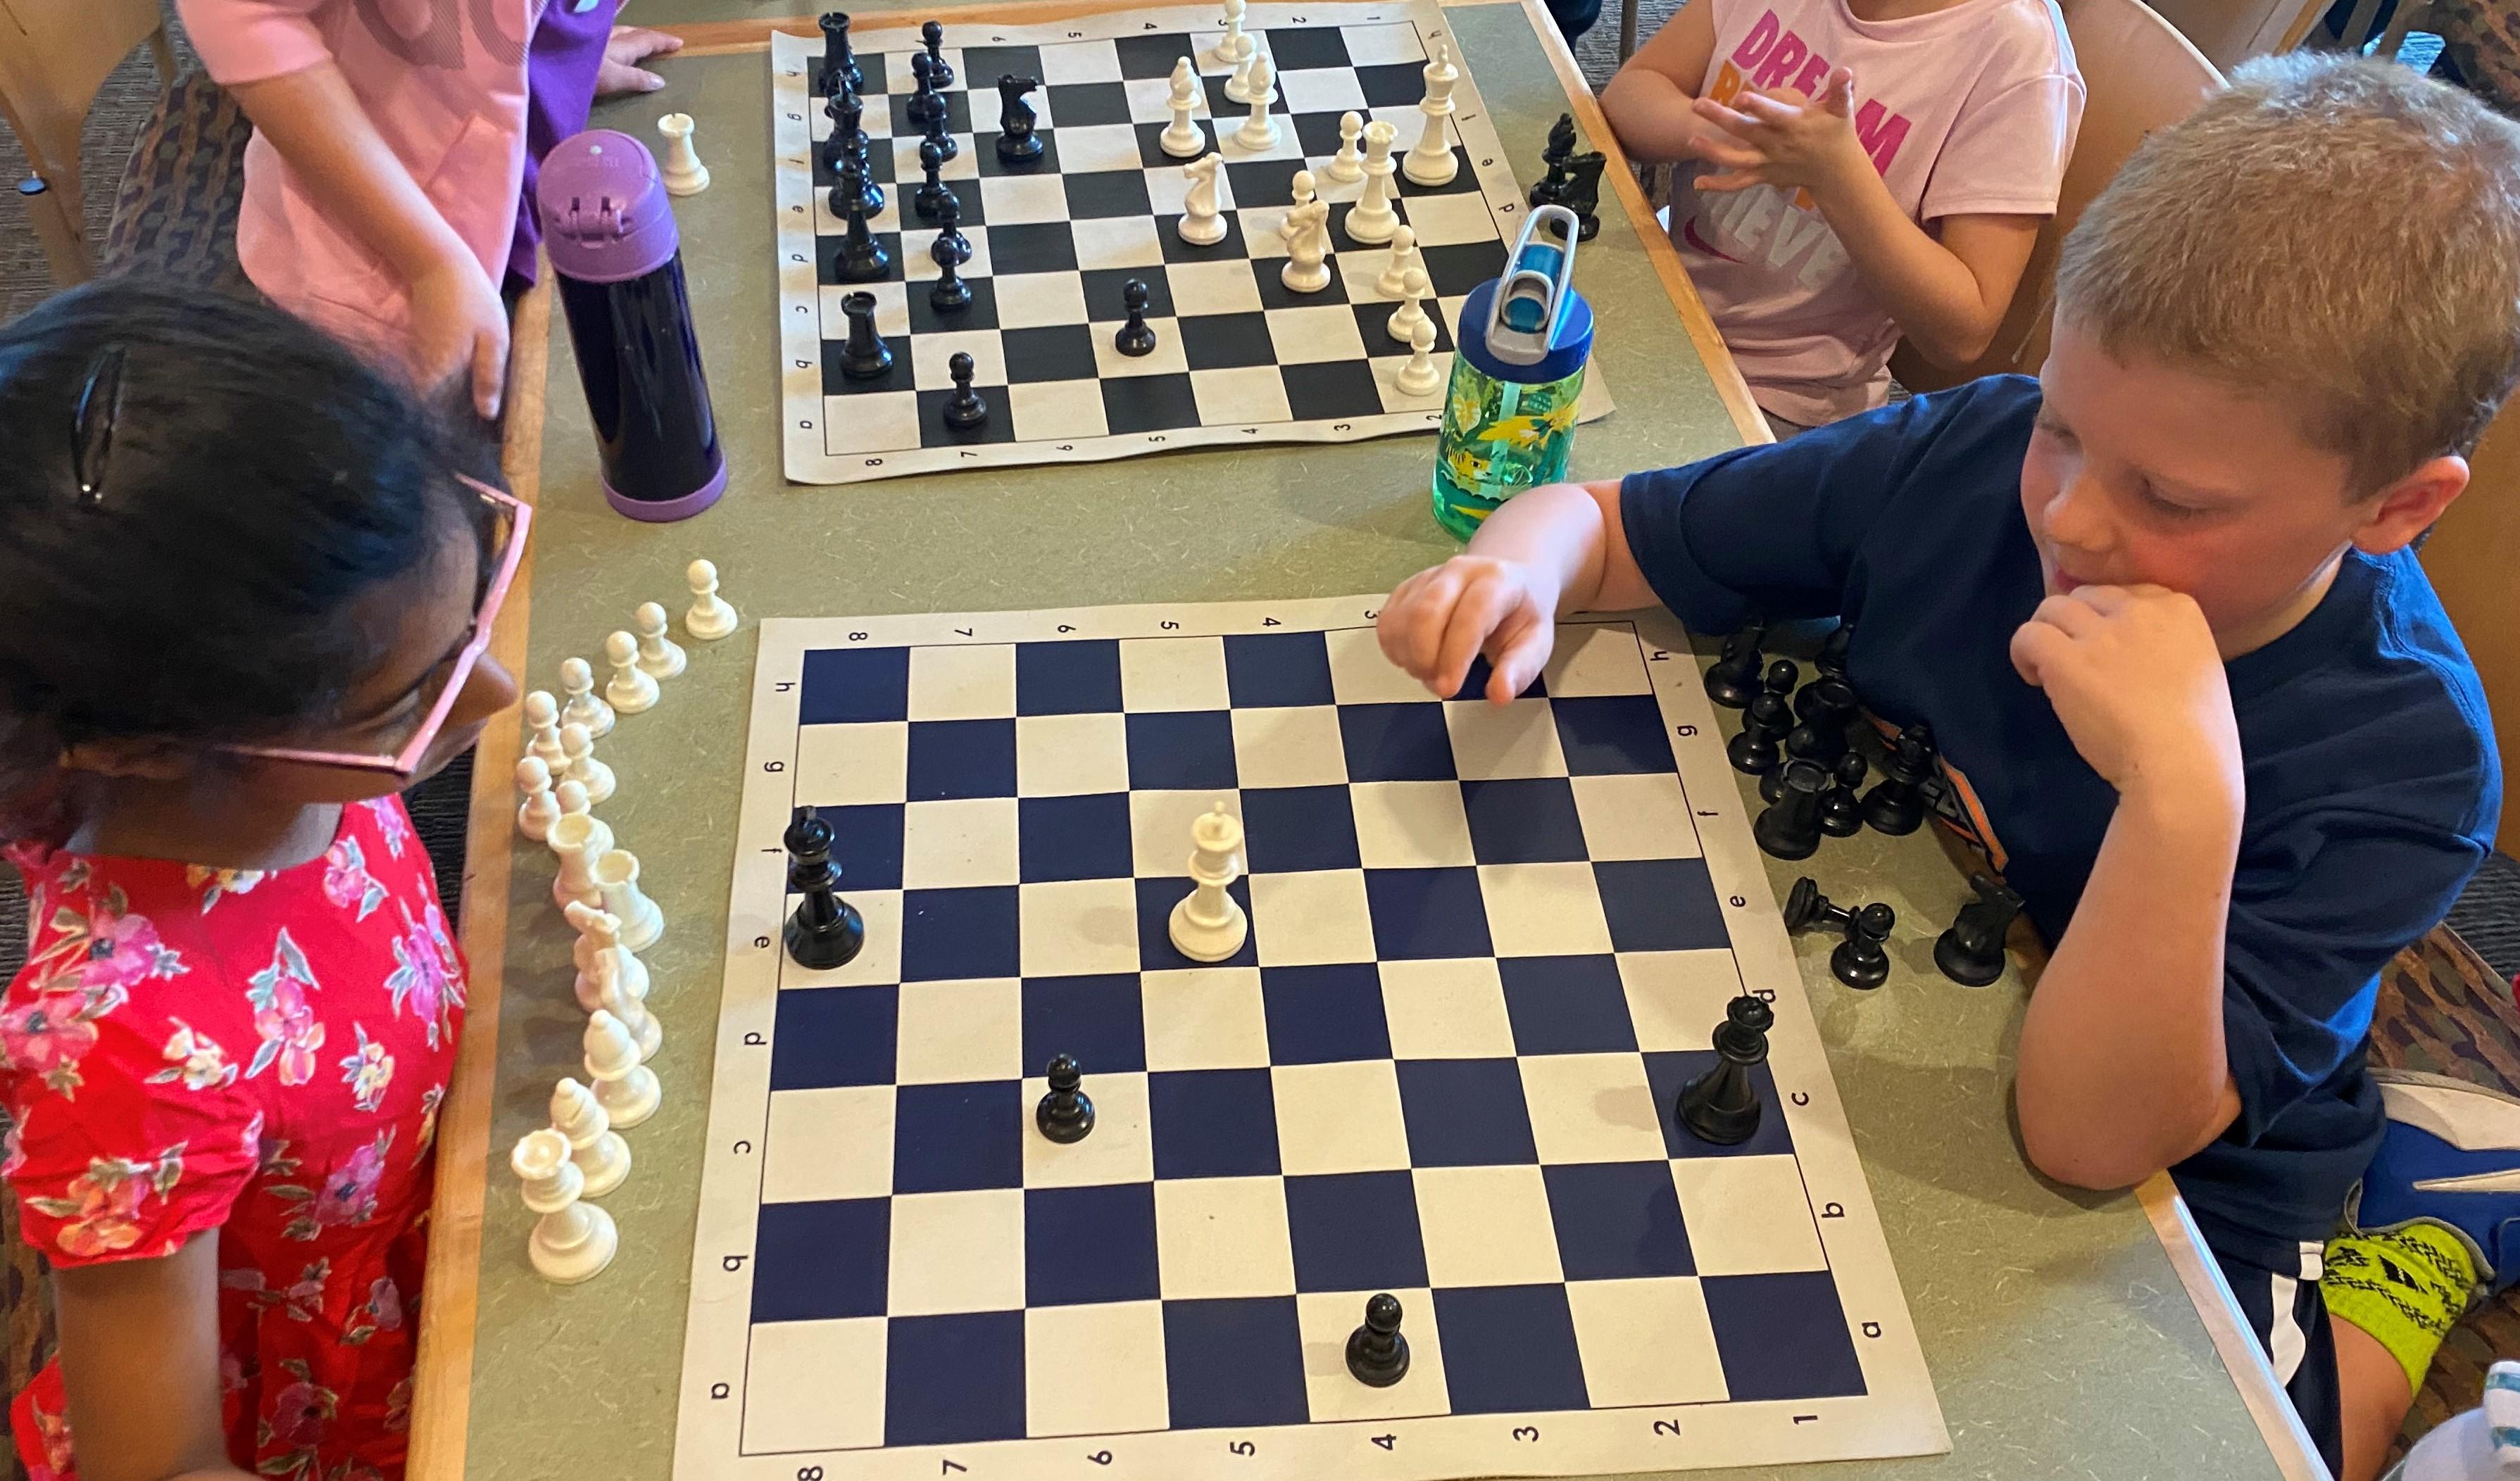 Chess being played at an After School Elementary School in Dublin.